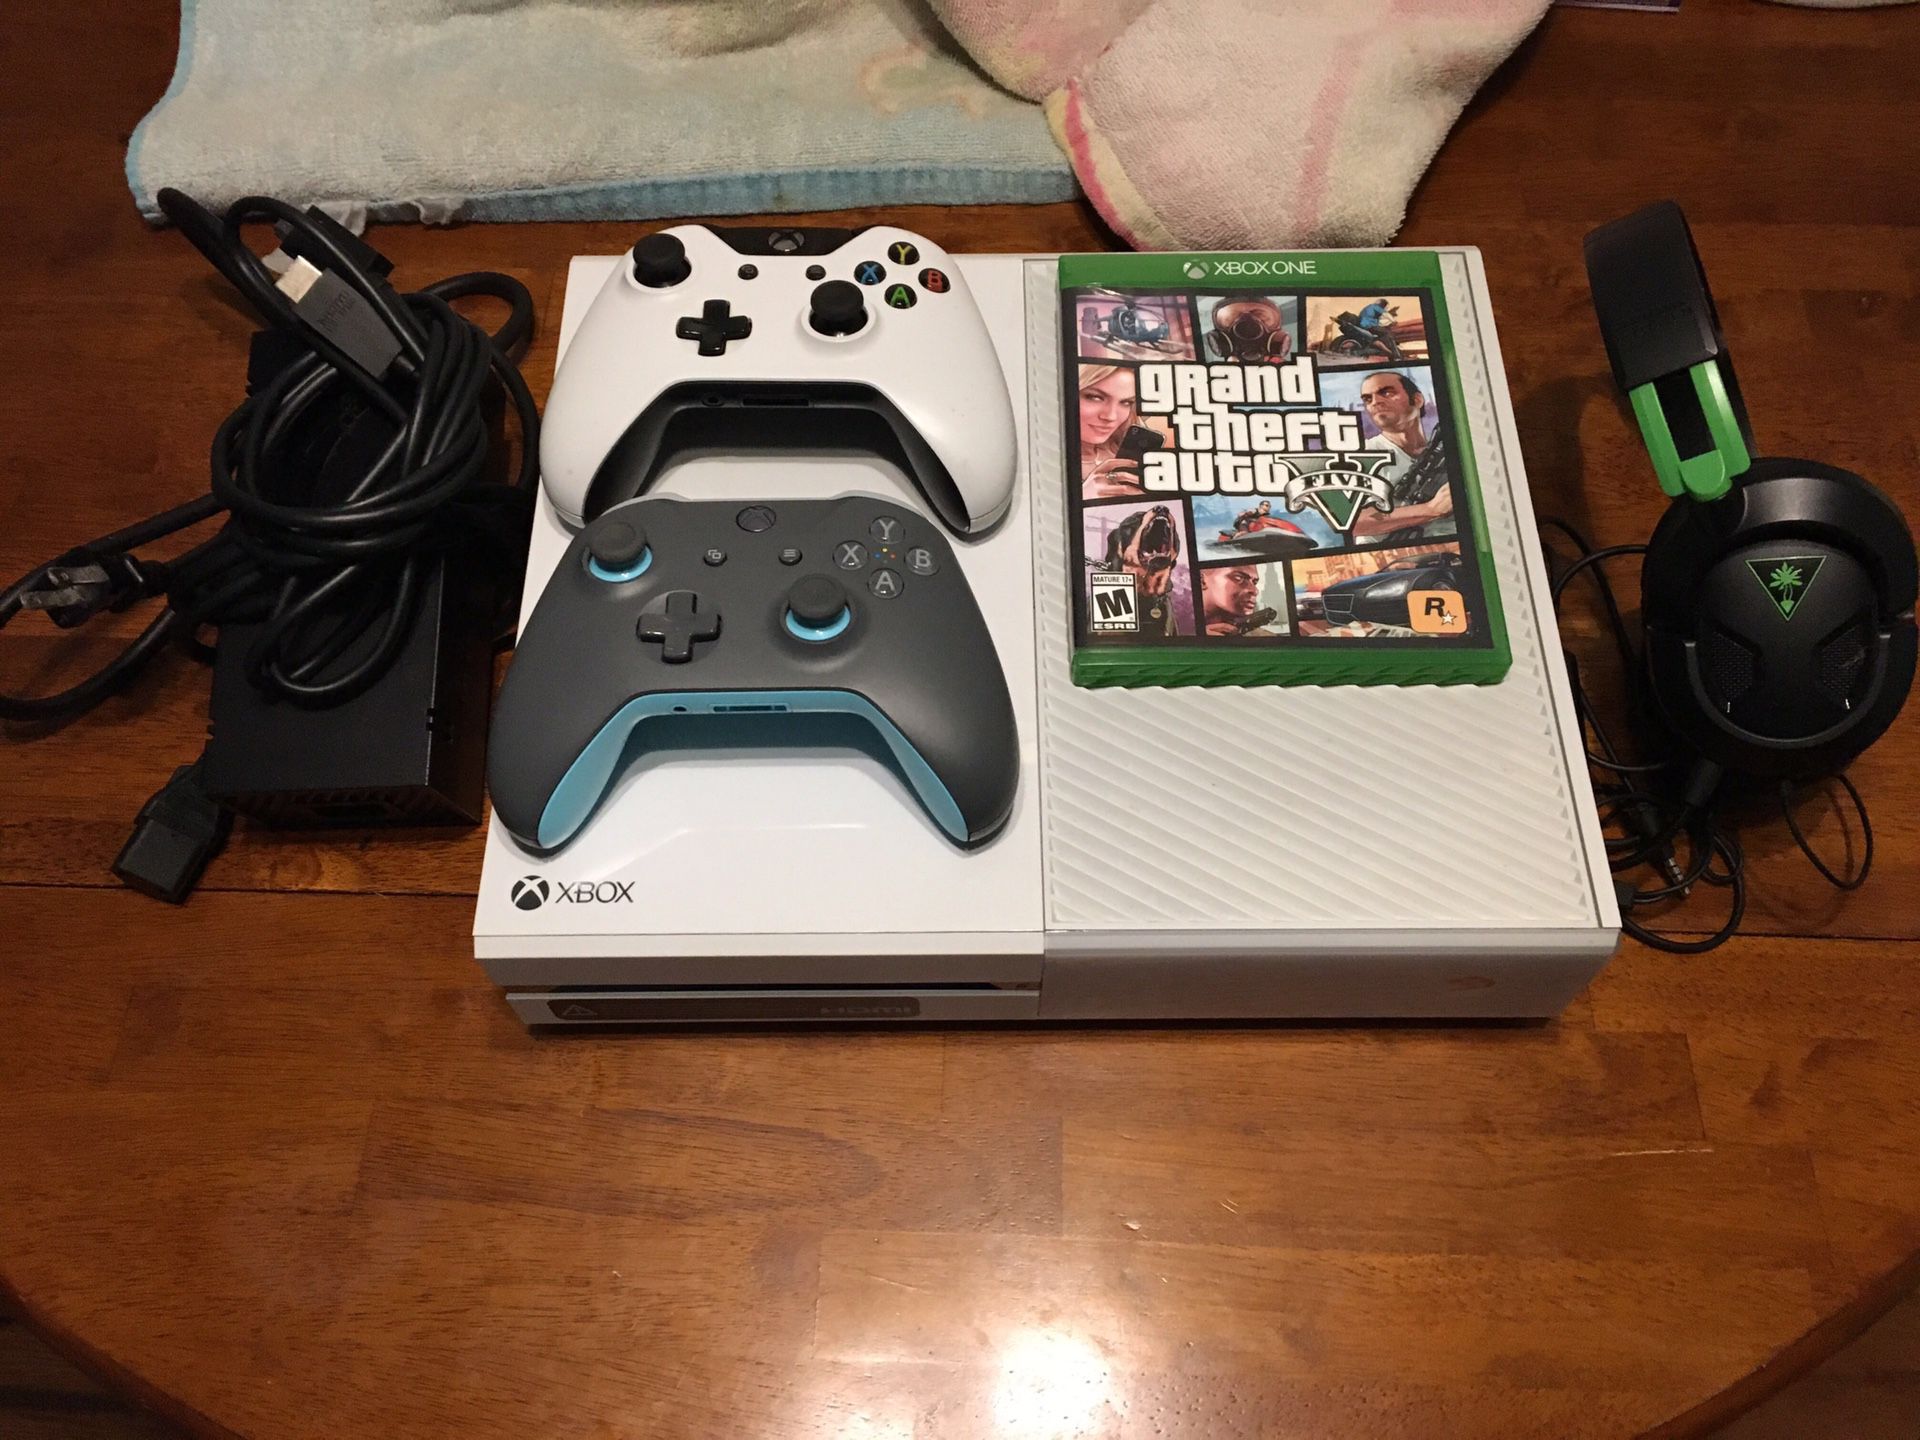 [PRICE NEGOTIABLE] Xbox One w/ Power Cable, 2 Controllers, Headset and GTA 5.